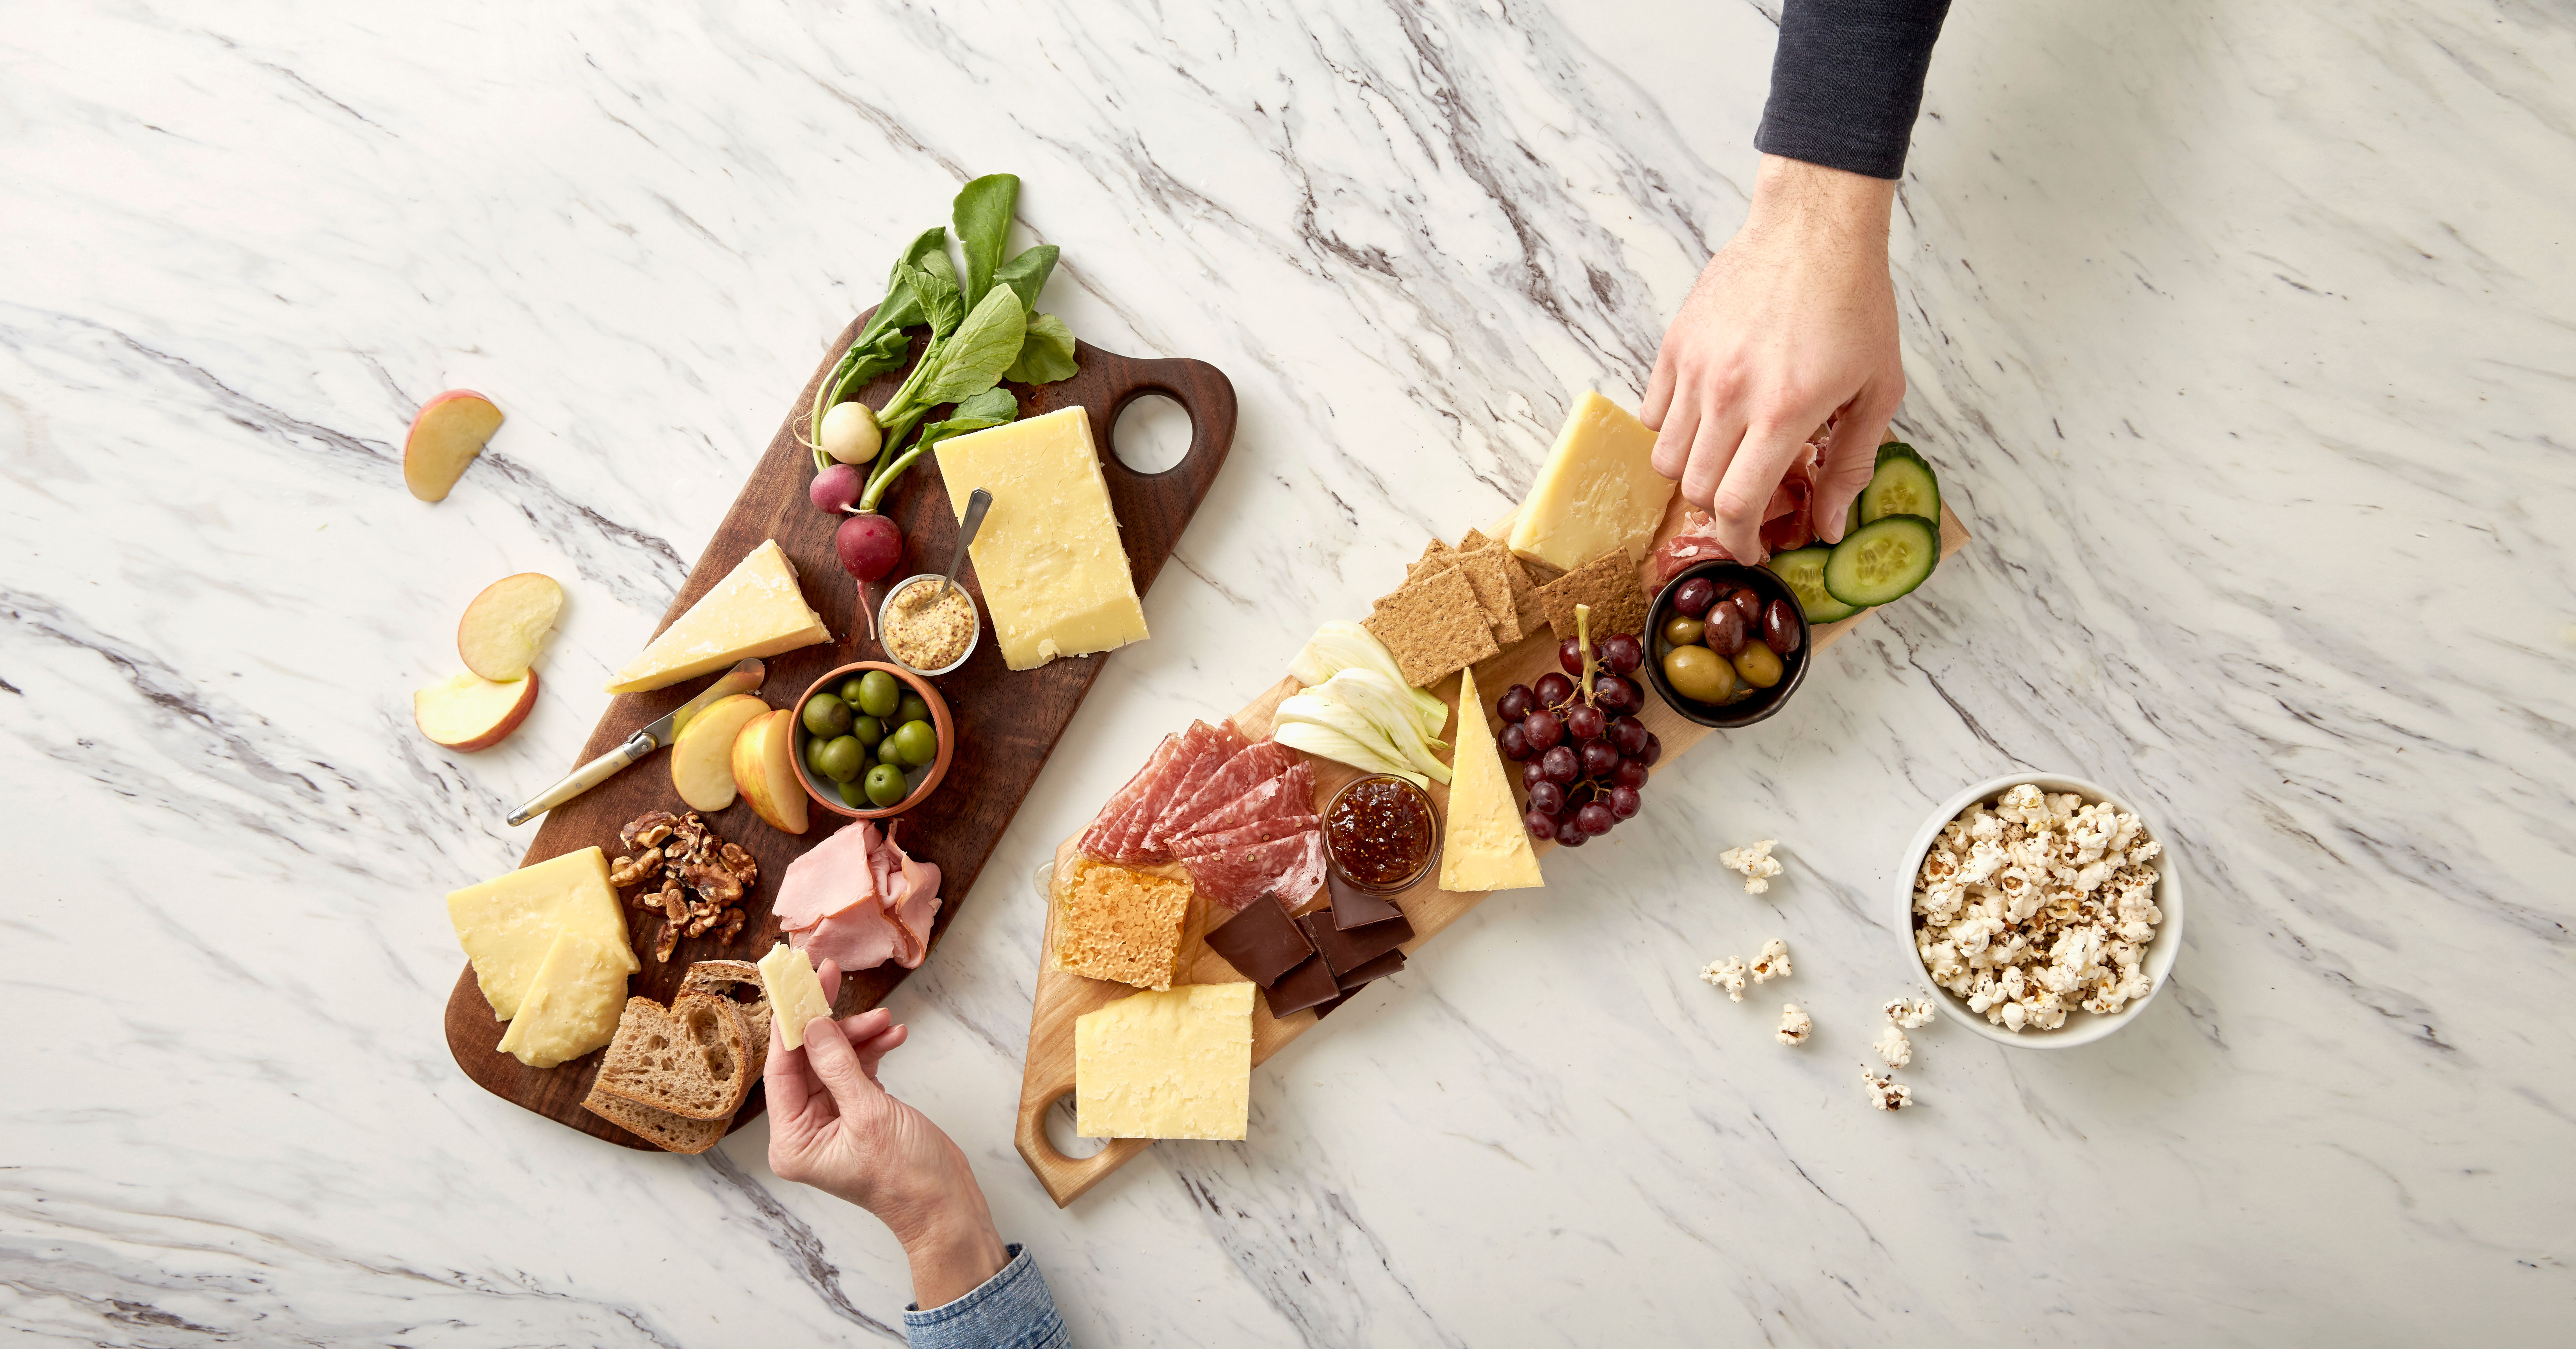 Ultimate Holiday Cheese Board - How To Make A Holiday Cheese Board